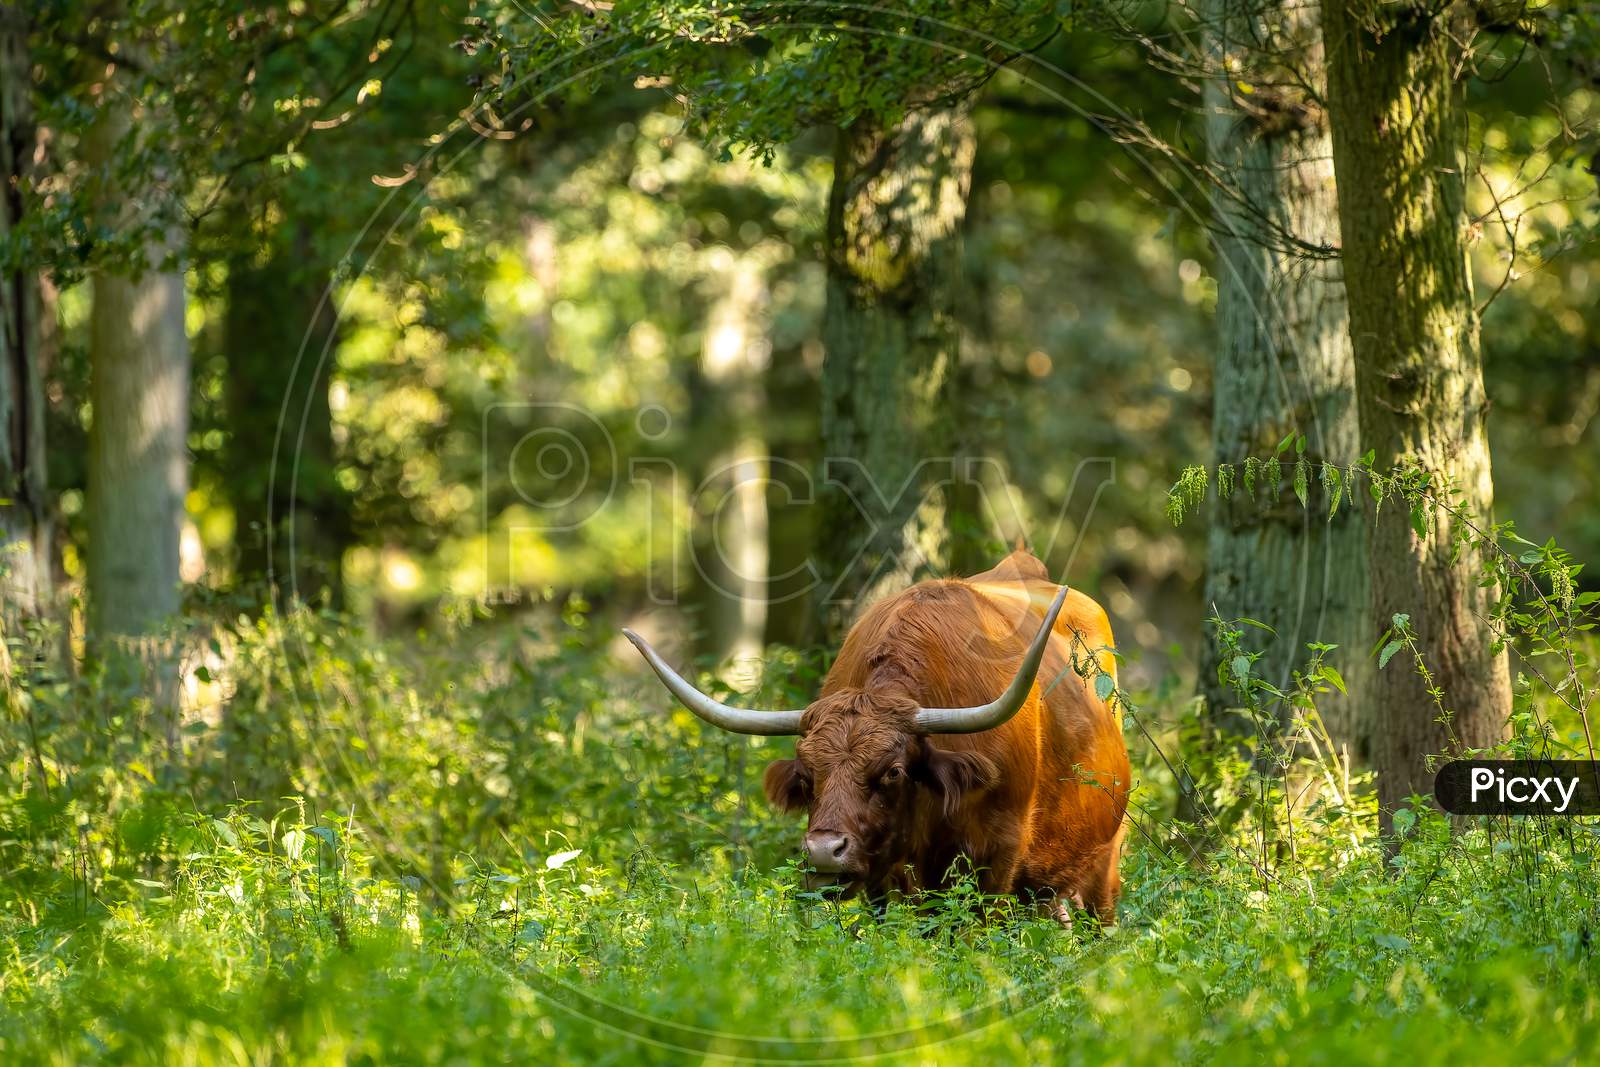 A scottish highland cattle in a forest in Hesse, Germany at a sunny day in summer.